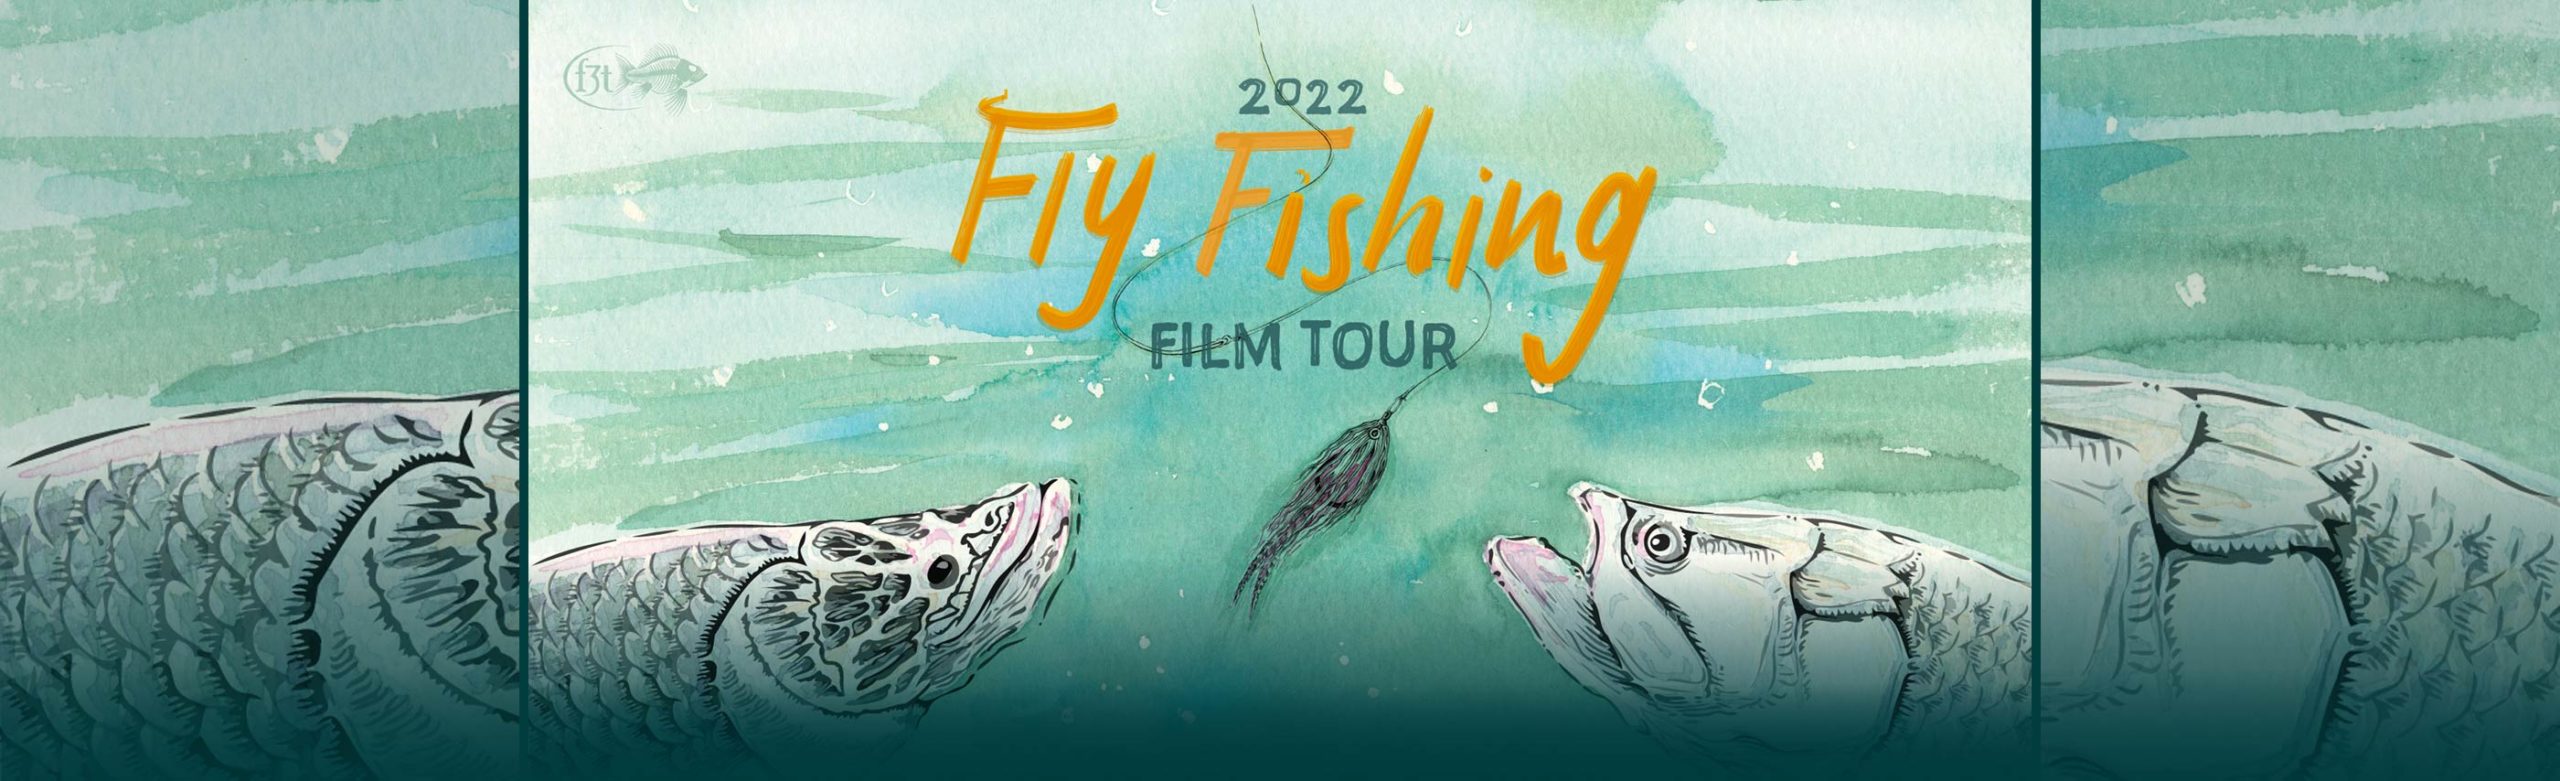 Fly Fishing Film Tour (Early Showing)